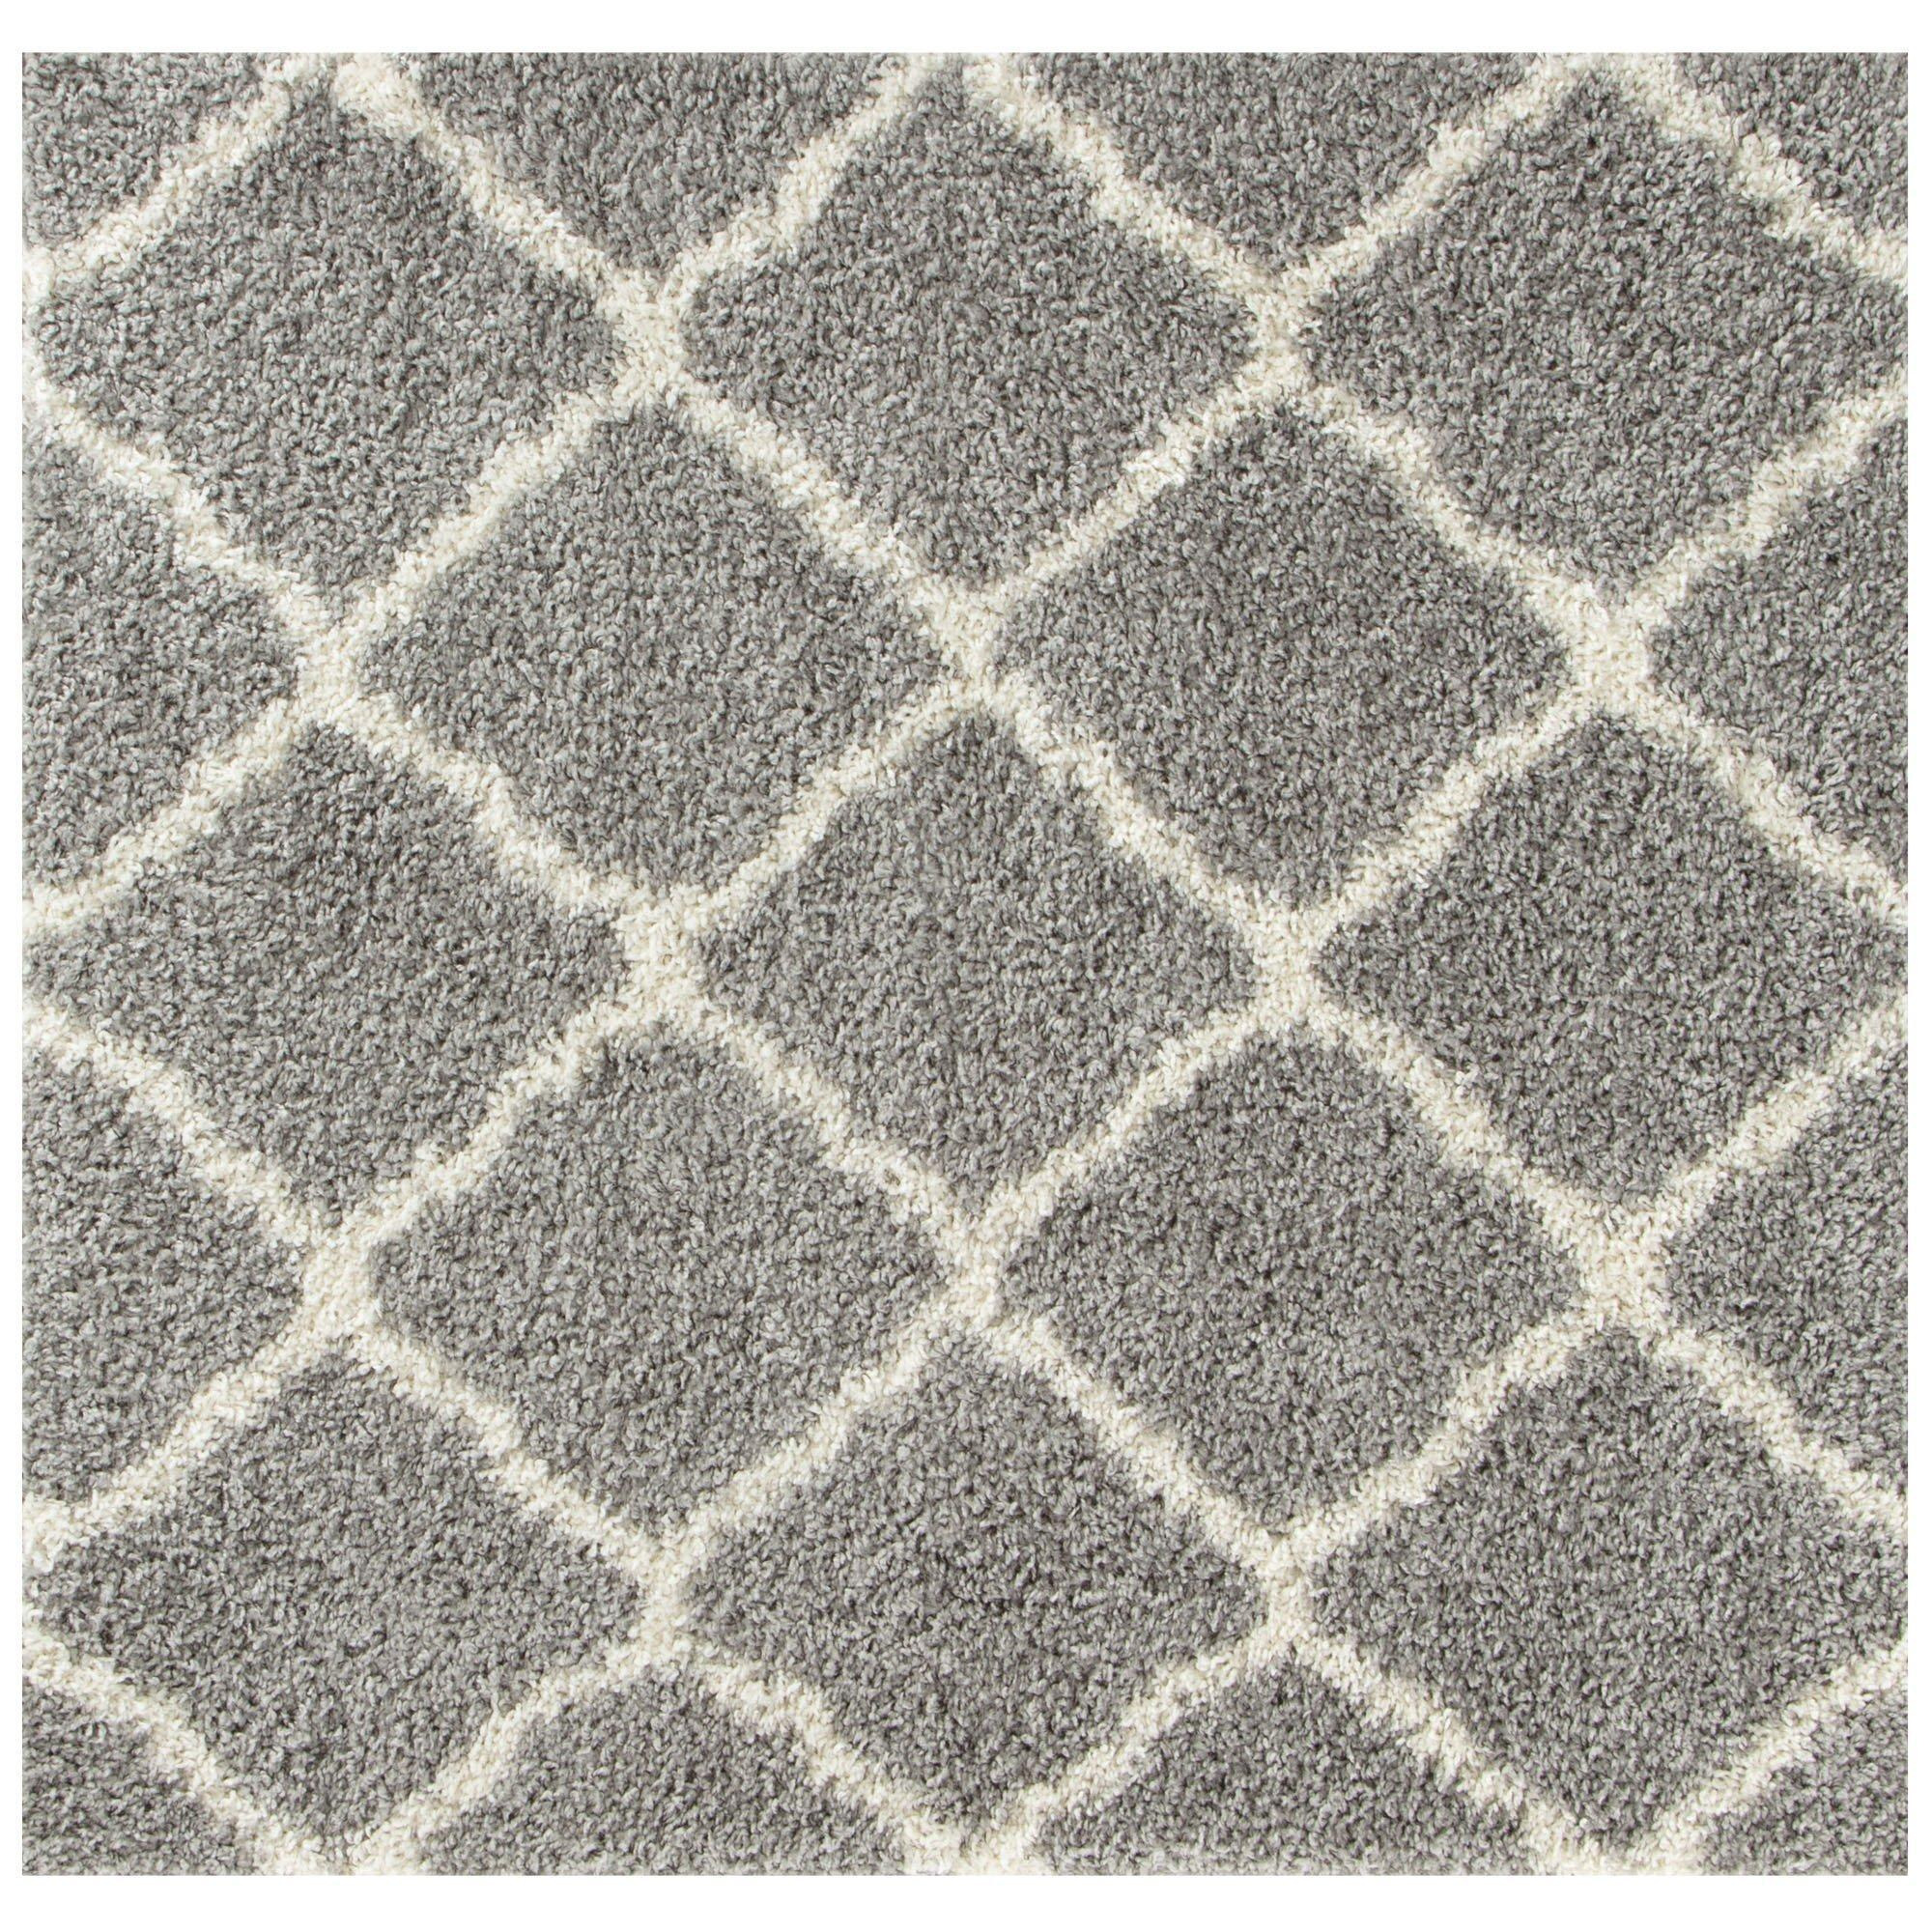 Myshaggy Collection Rugs Moroccan Design in Grey - 385 GI - image 1